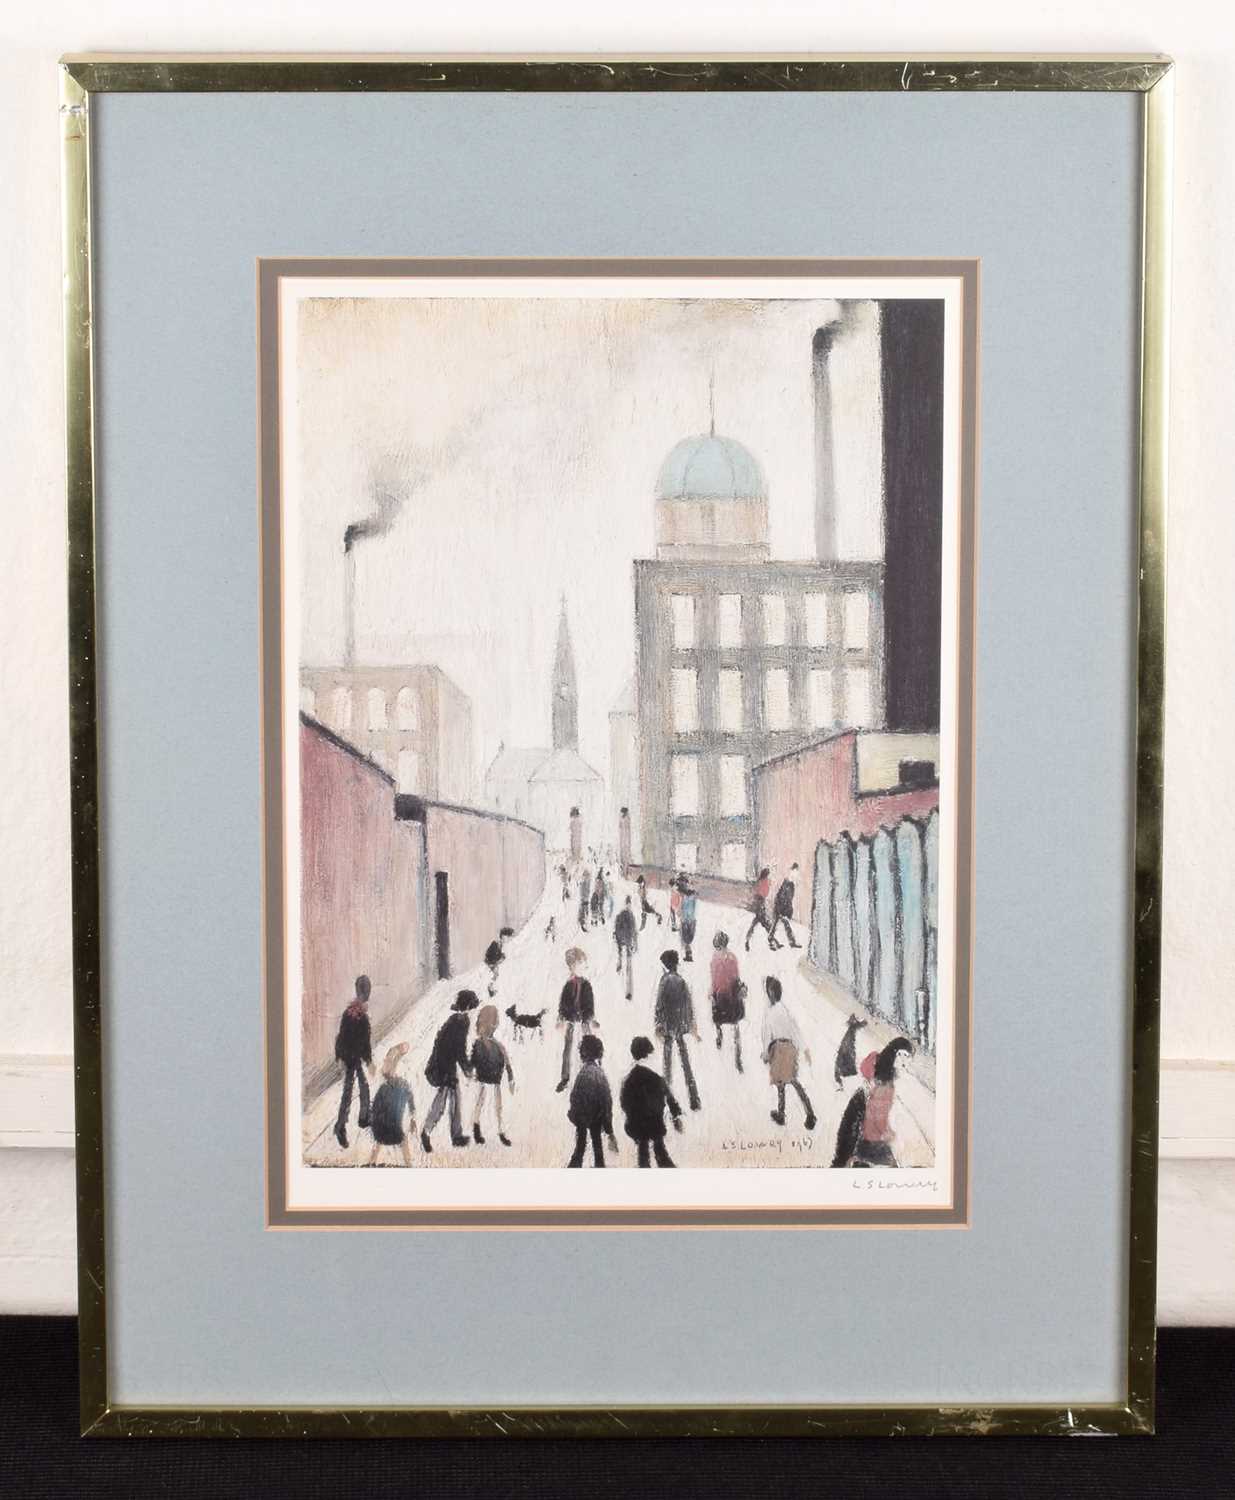 L.S. Lowry R.A. (British 1887-1976) "Mrs Swindell's Picture" - Image 2 of 2